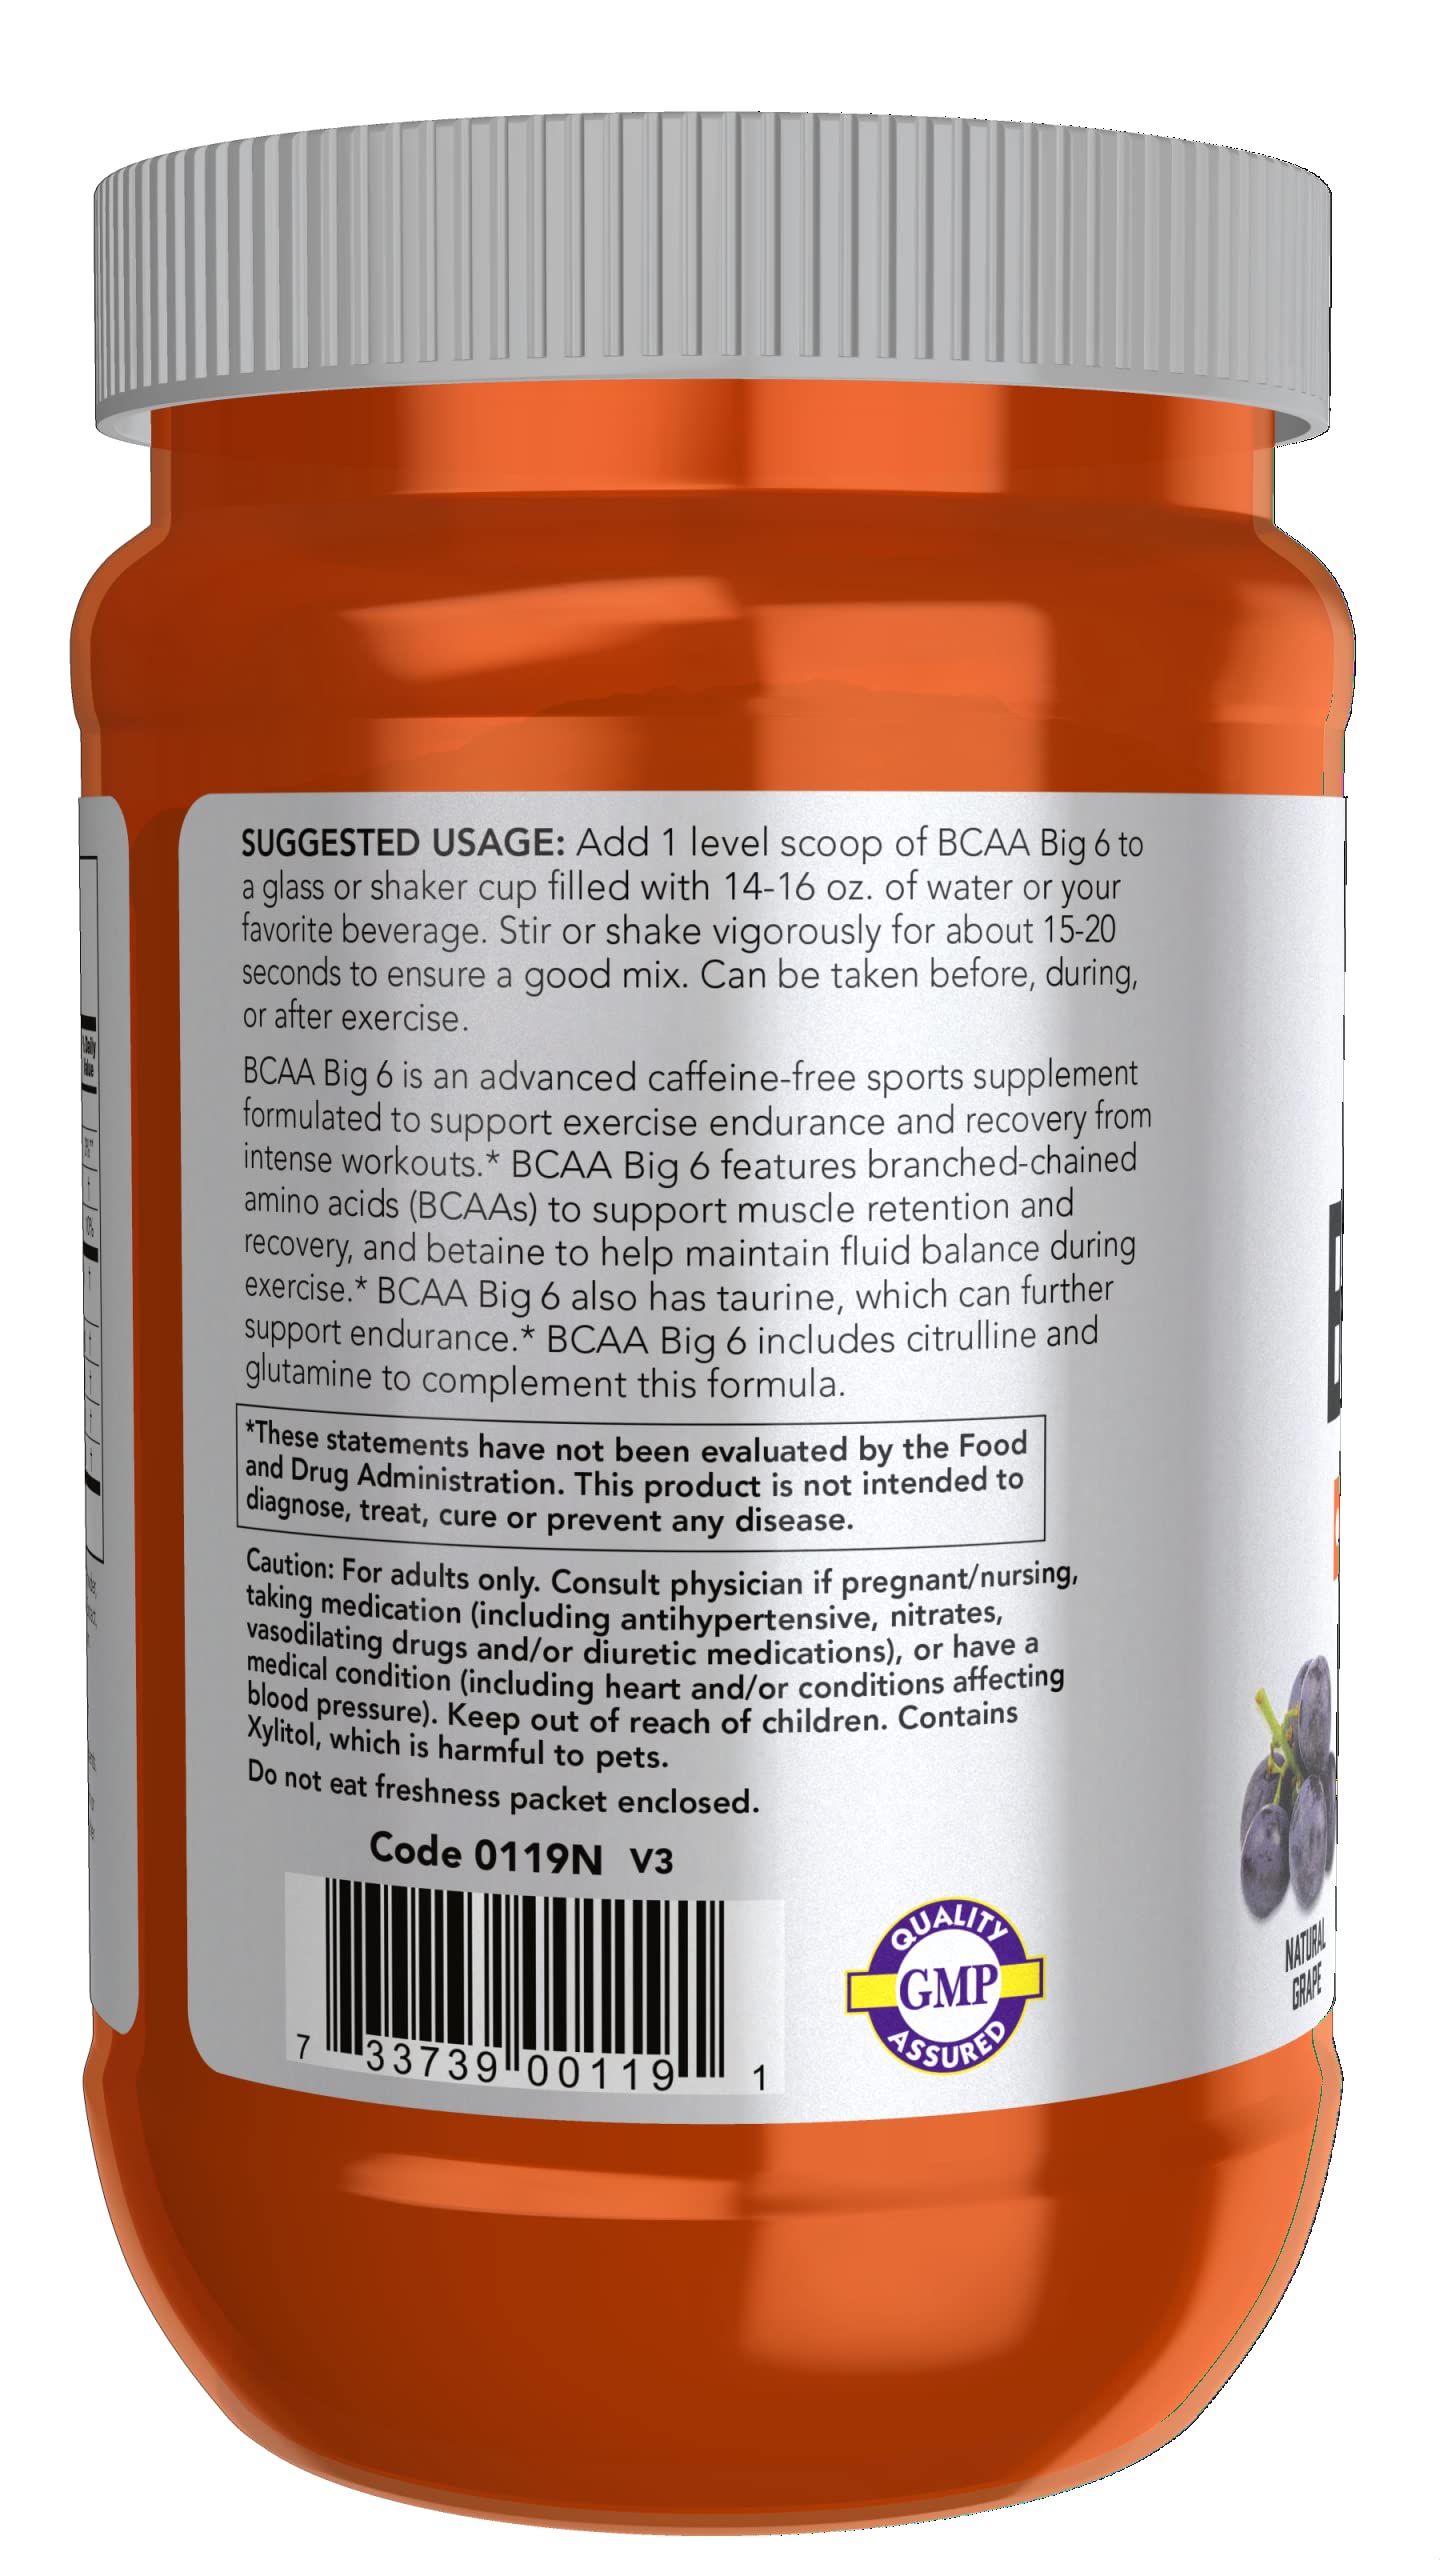 NOW Sports Nutrition, BCAA (Branched Chain Amino Acids) Big 6, Grape Flavor, 600 Grams